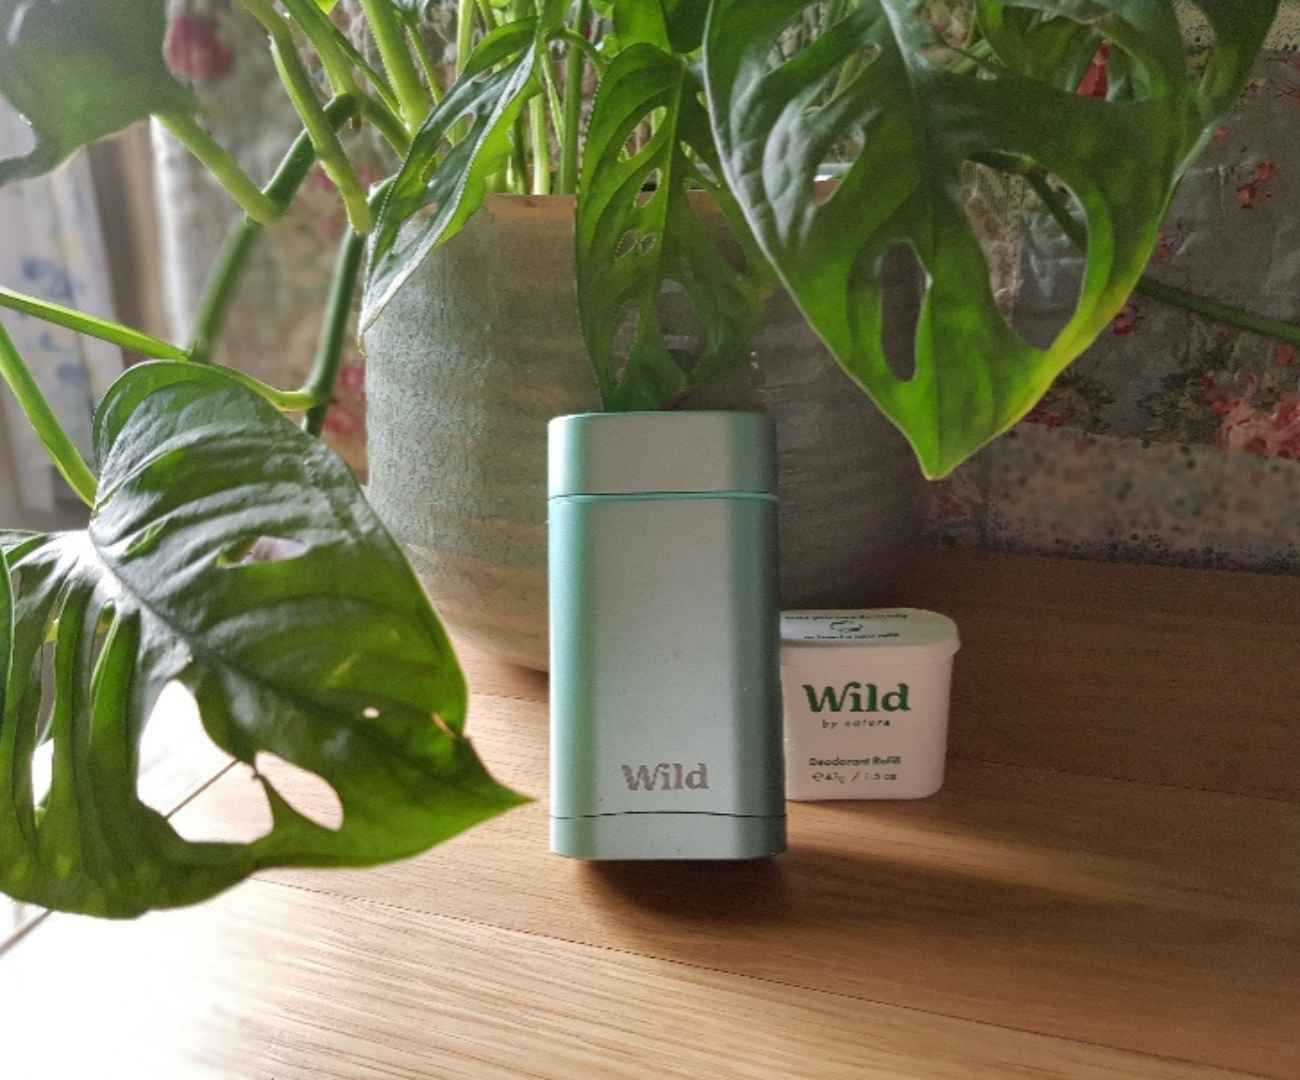 Wild - Let's face it, your old deodorant probably stinks